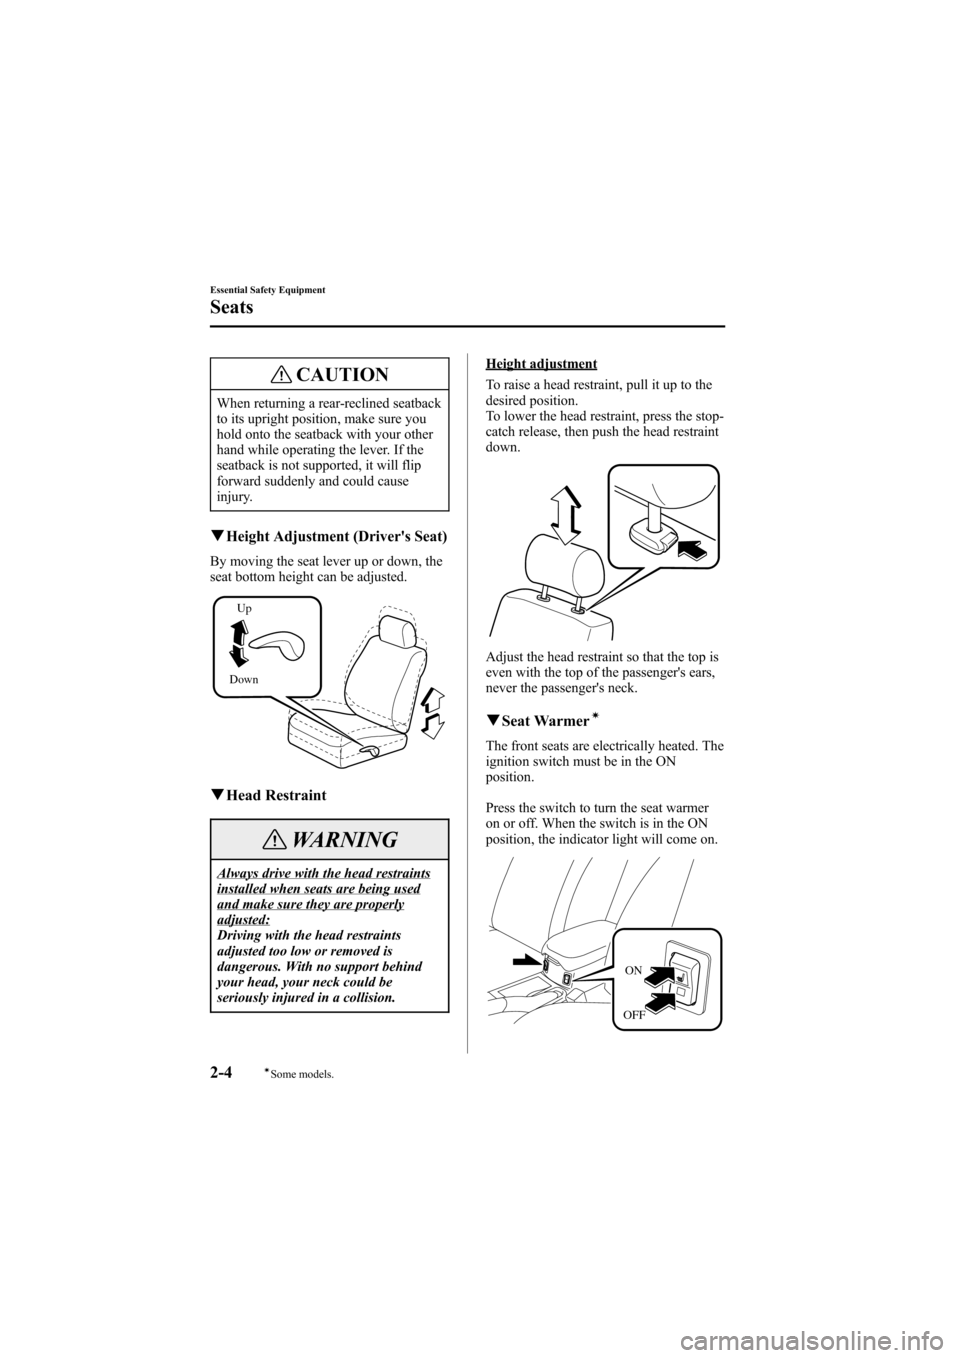 MAZDA MODEL 6 2007  Owners Manual (in English) Black plate (18,1)
CAUTION
When returning a rear-reclined seatback
to its upright position, make sure you
hold onto the seatback with your other
hand while operating the lever. If the
seatback is not 